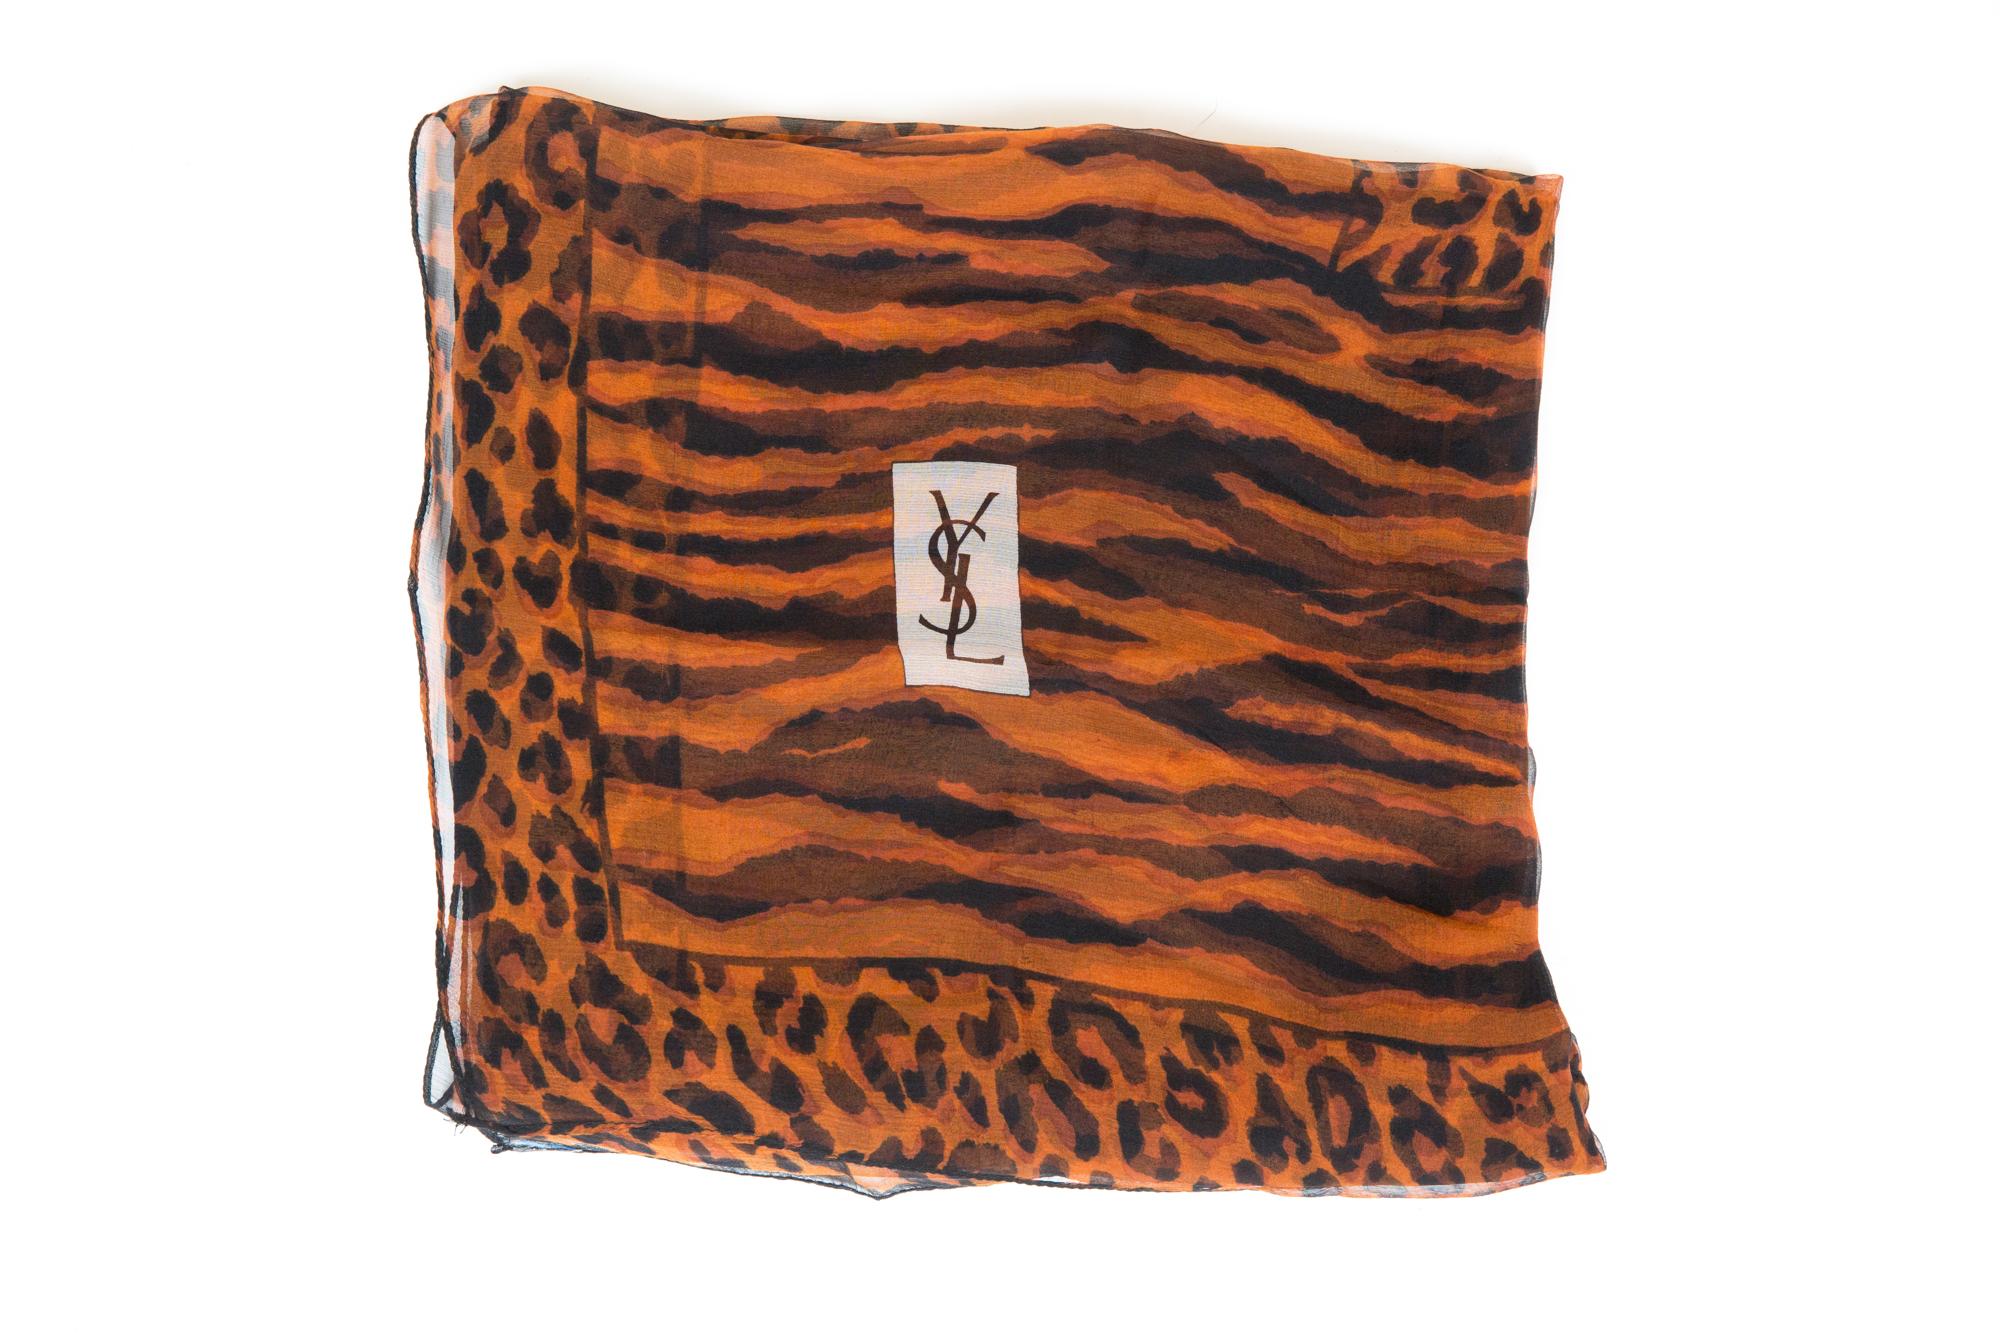 Gorgeous Saint Laurent YSL brown georgette silk shawl featuring a large size, a black animal print motive, a logo signature.
Marked YSL
53.1in. (135cm) X 53.1in. (135cm)  In good vintage condition.  
Made in France.  
We guarantee you will receive